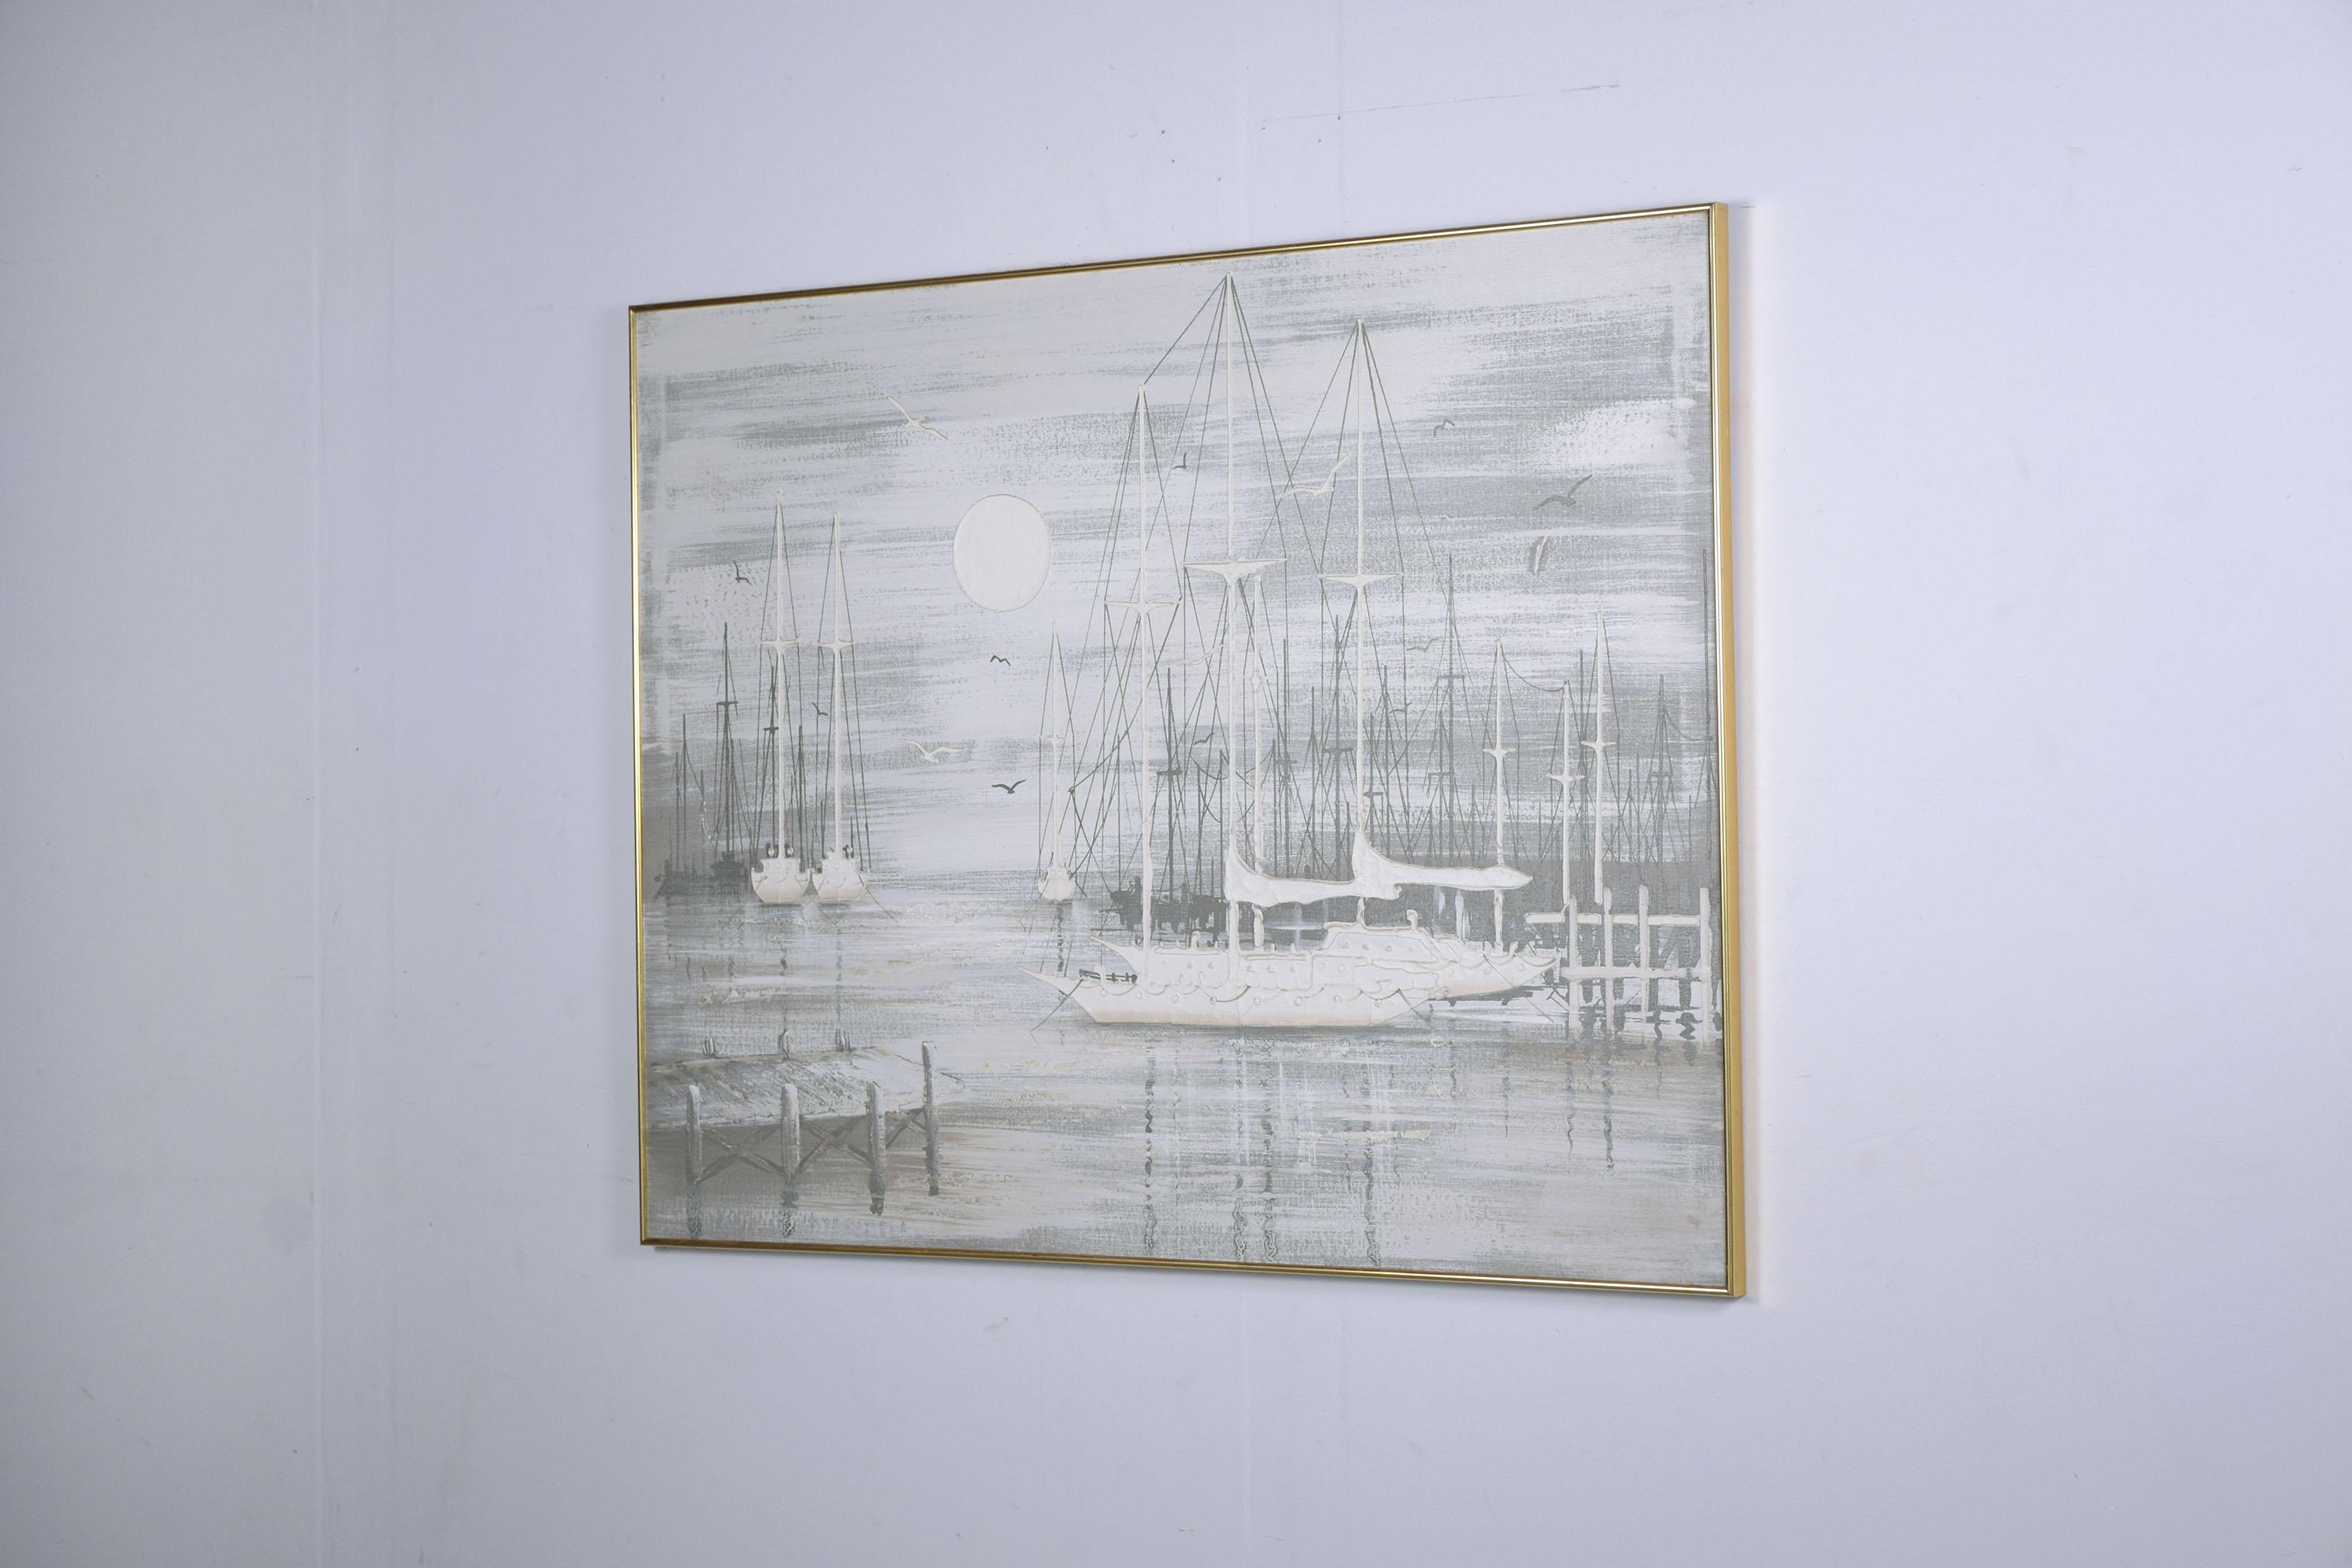 This charming mid-century modern acrylic painting depicts boats on a marina under the moonlight. This beautiful painting is ready to be displayed in any room or entryway for years to come.